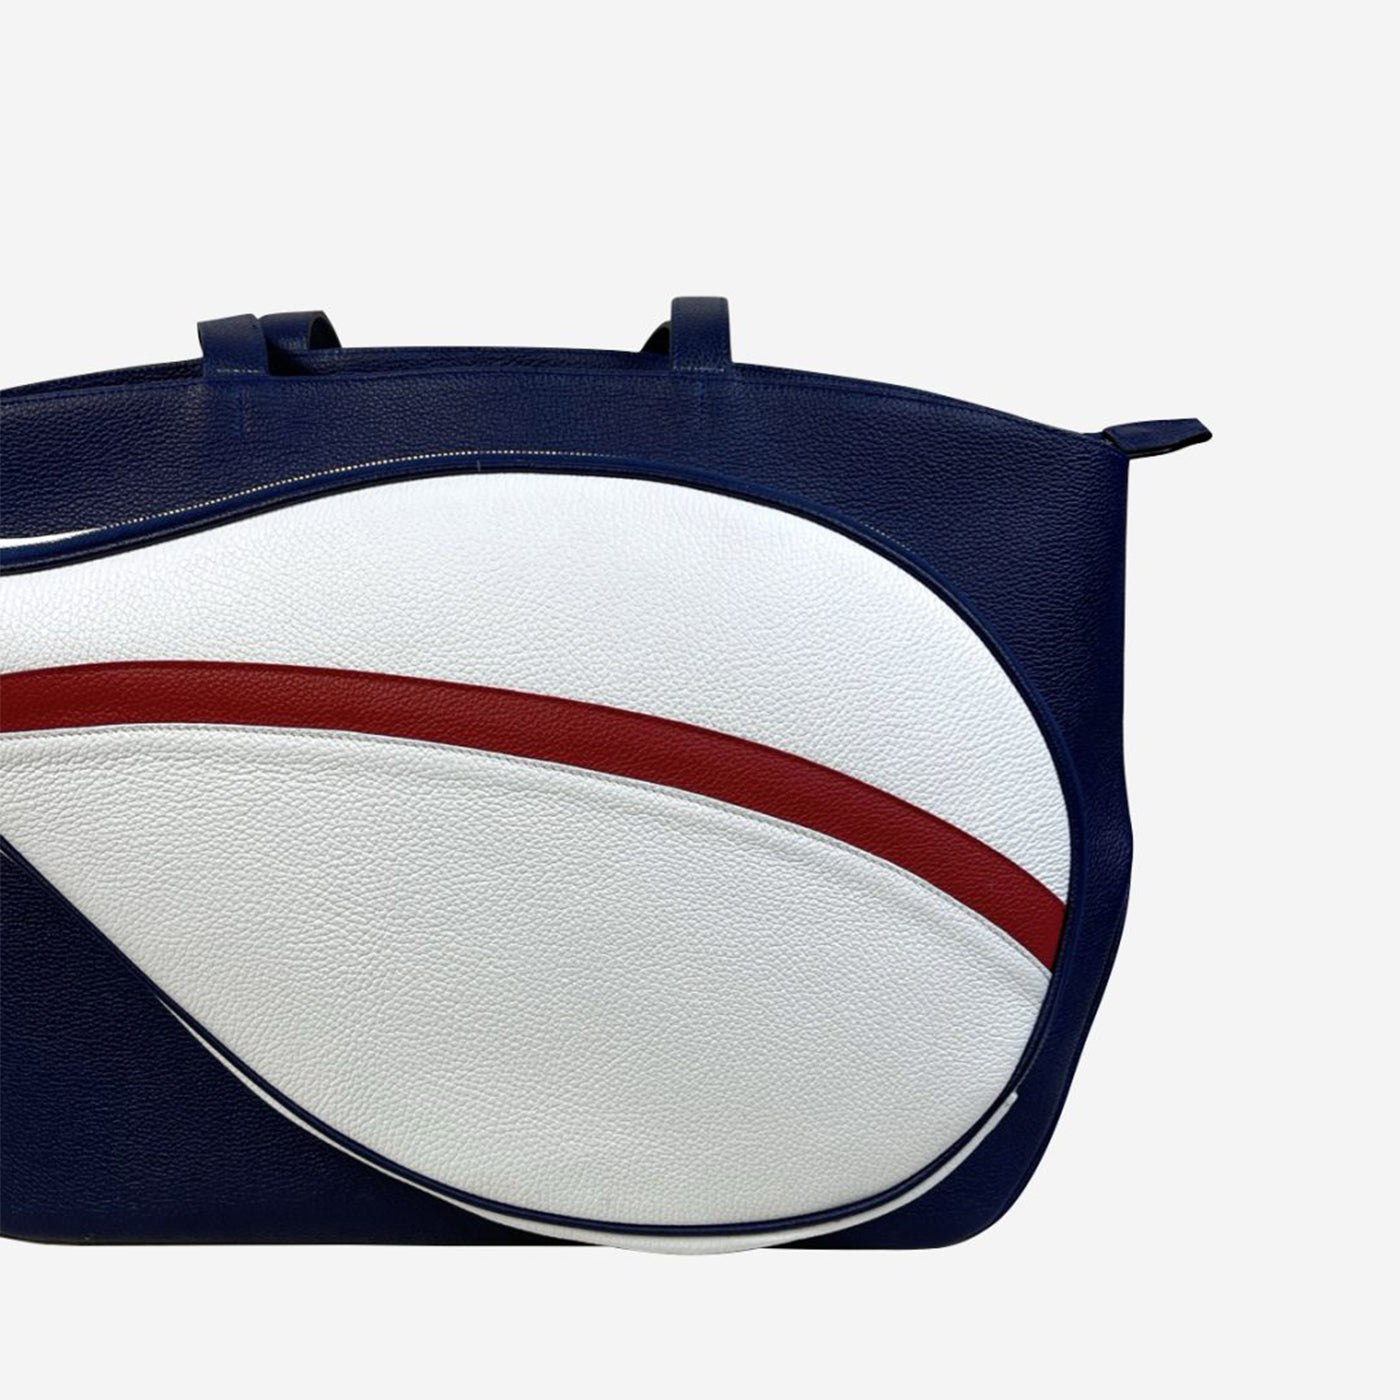 Sport Blue/Red/White Bag With Tennis-Racket-Shaped Pocket - Alternative view 1